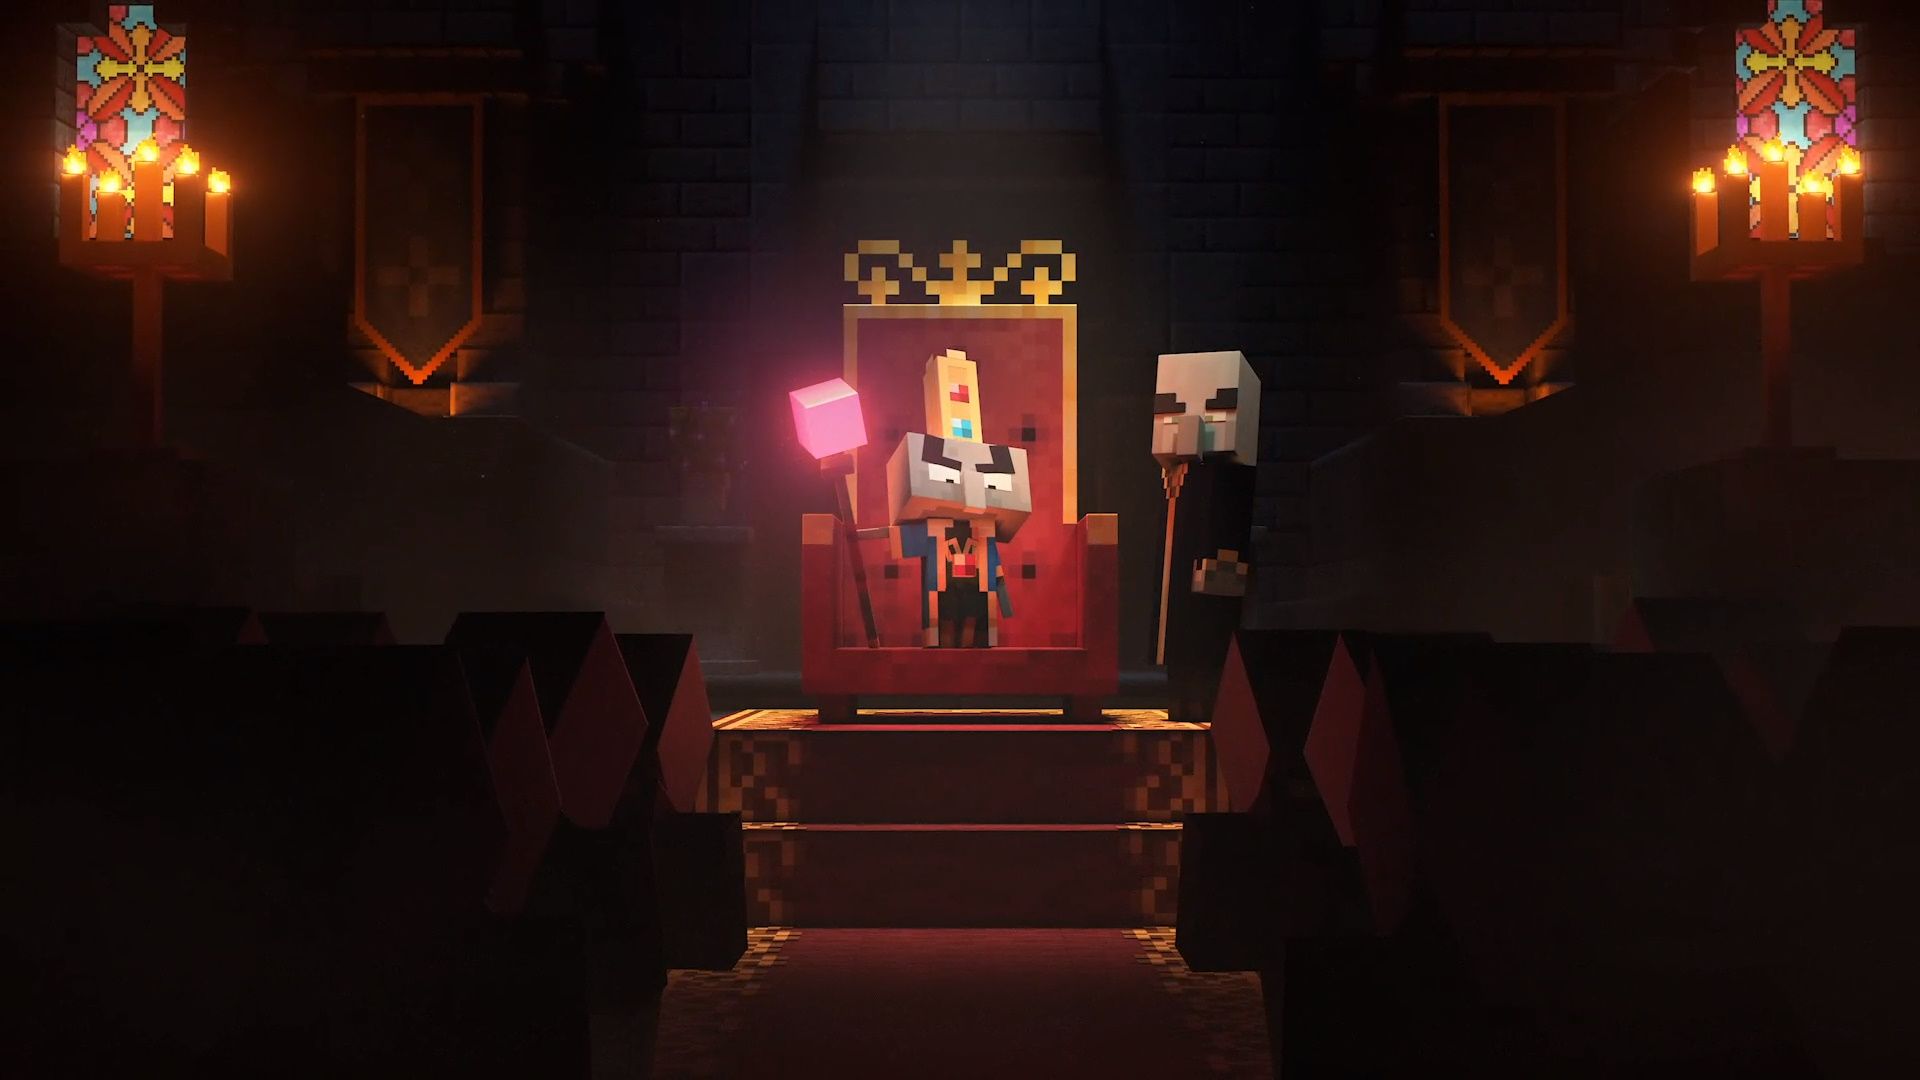 Want to jump into Minecraft: Dungeons early? The closed beta sign